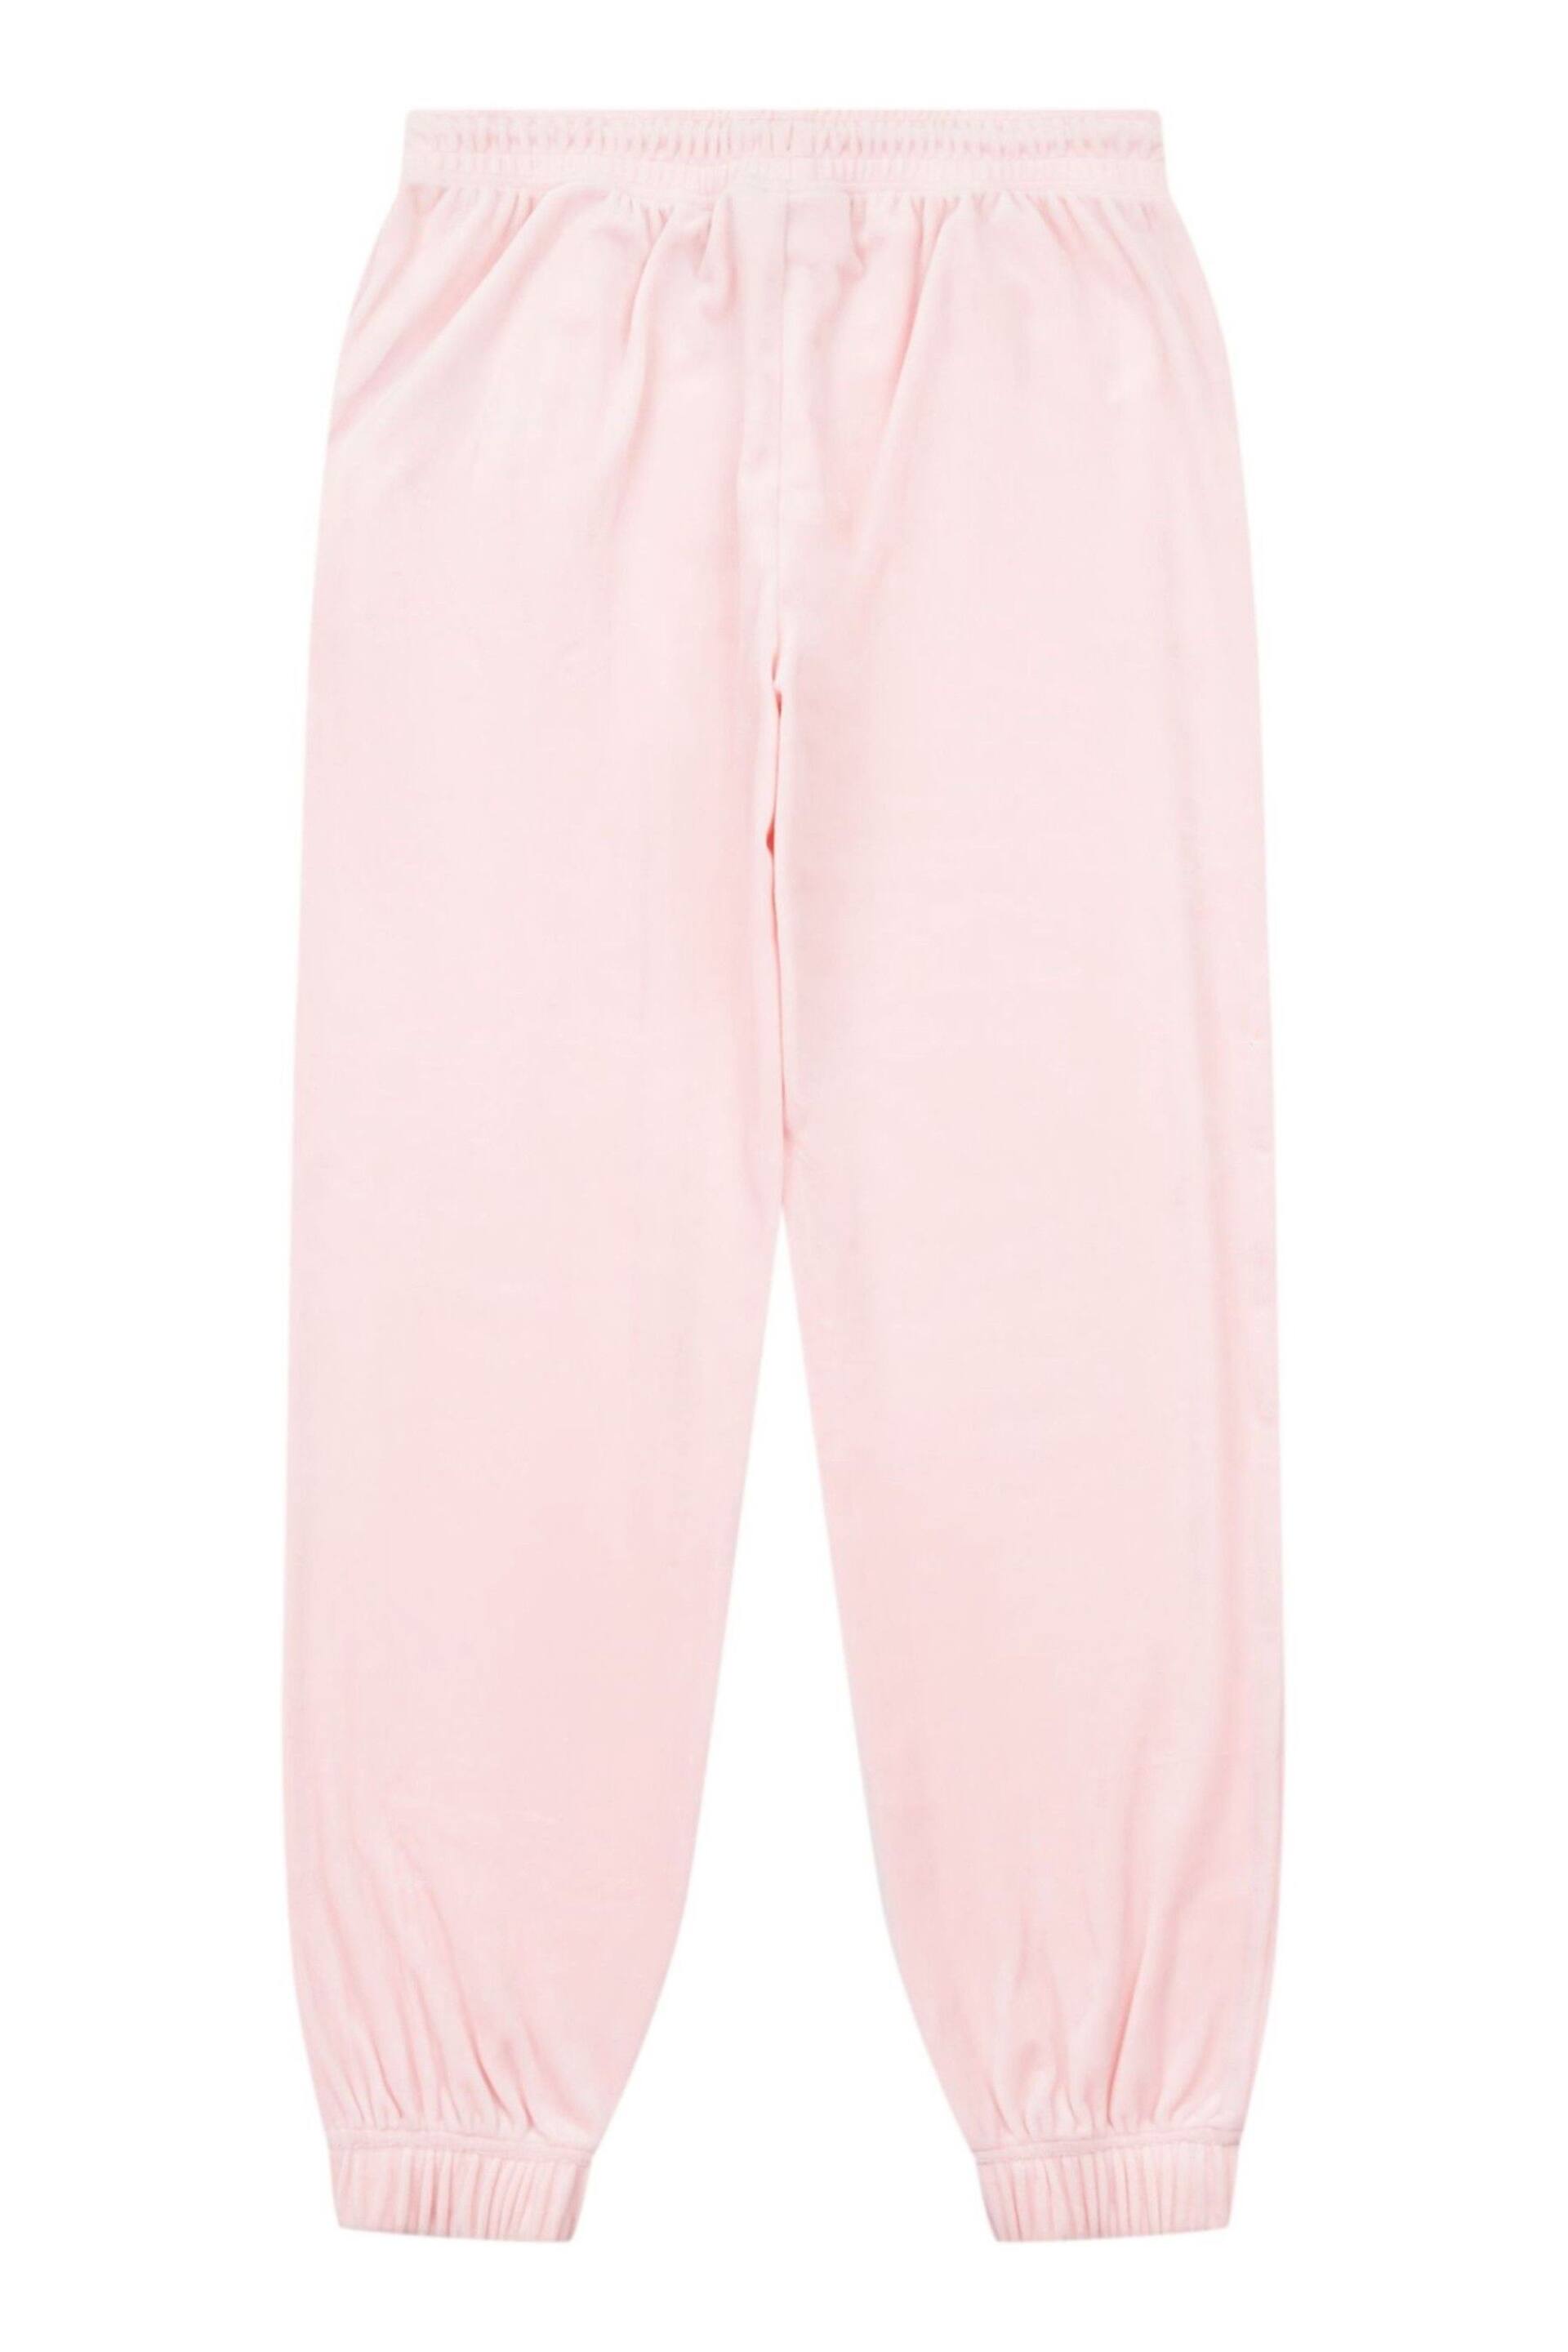 Juicy Couture Girls Pink Velour Joggers - Image 2 of 3